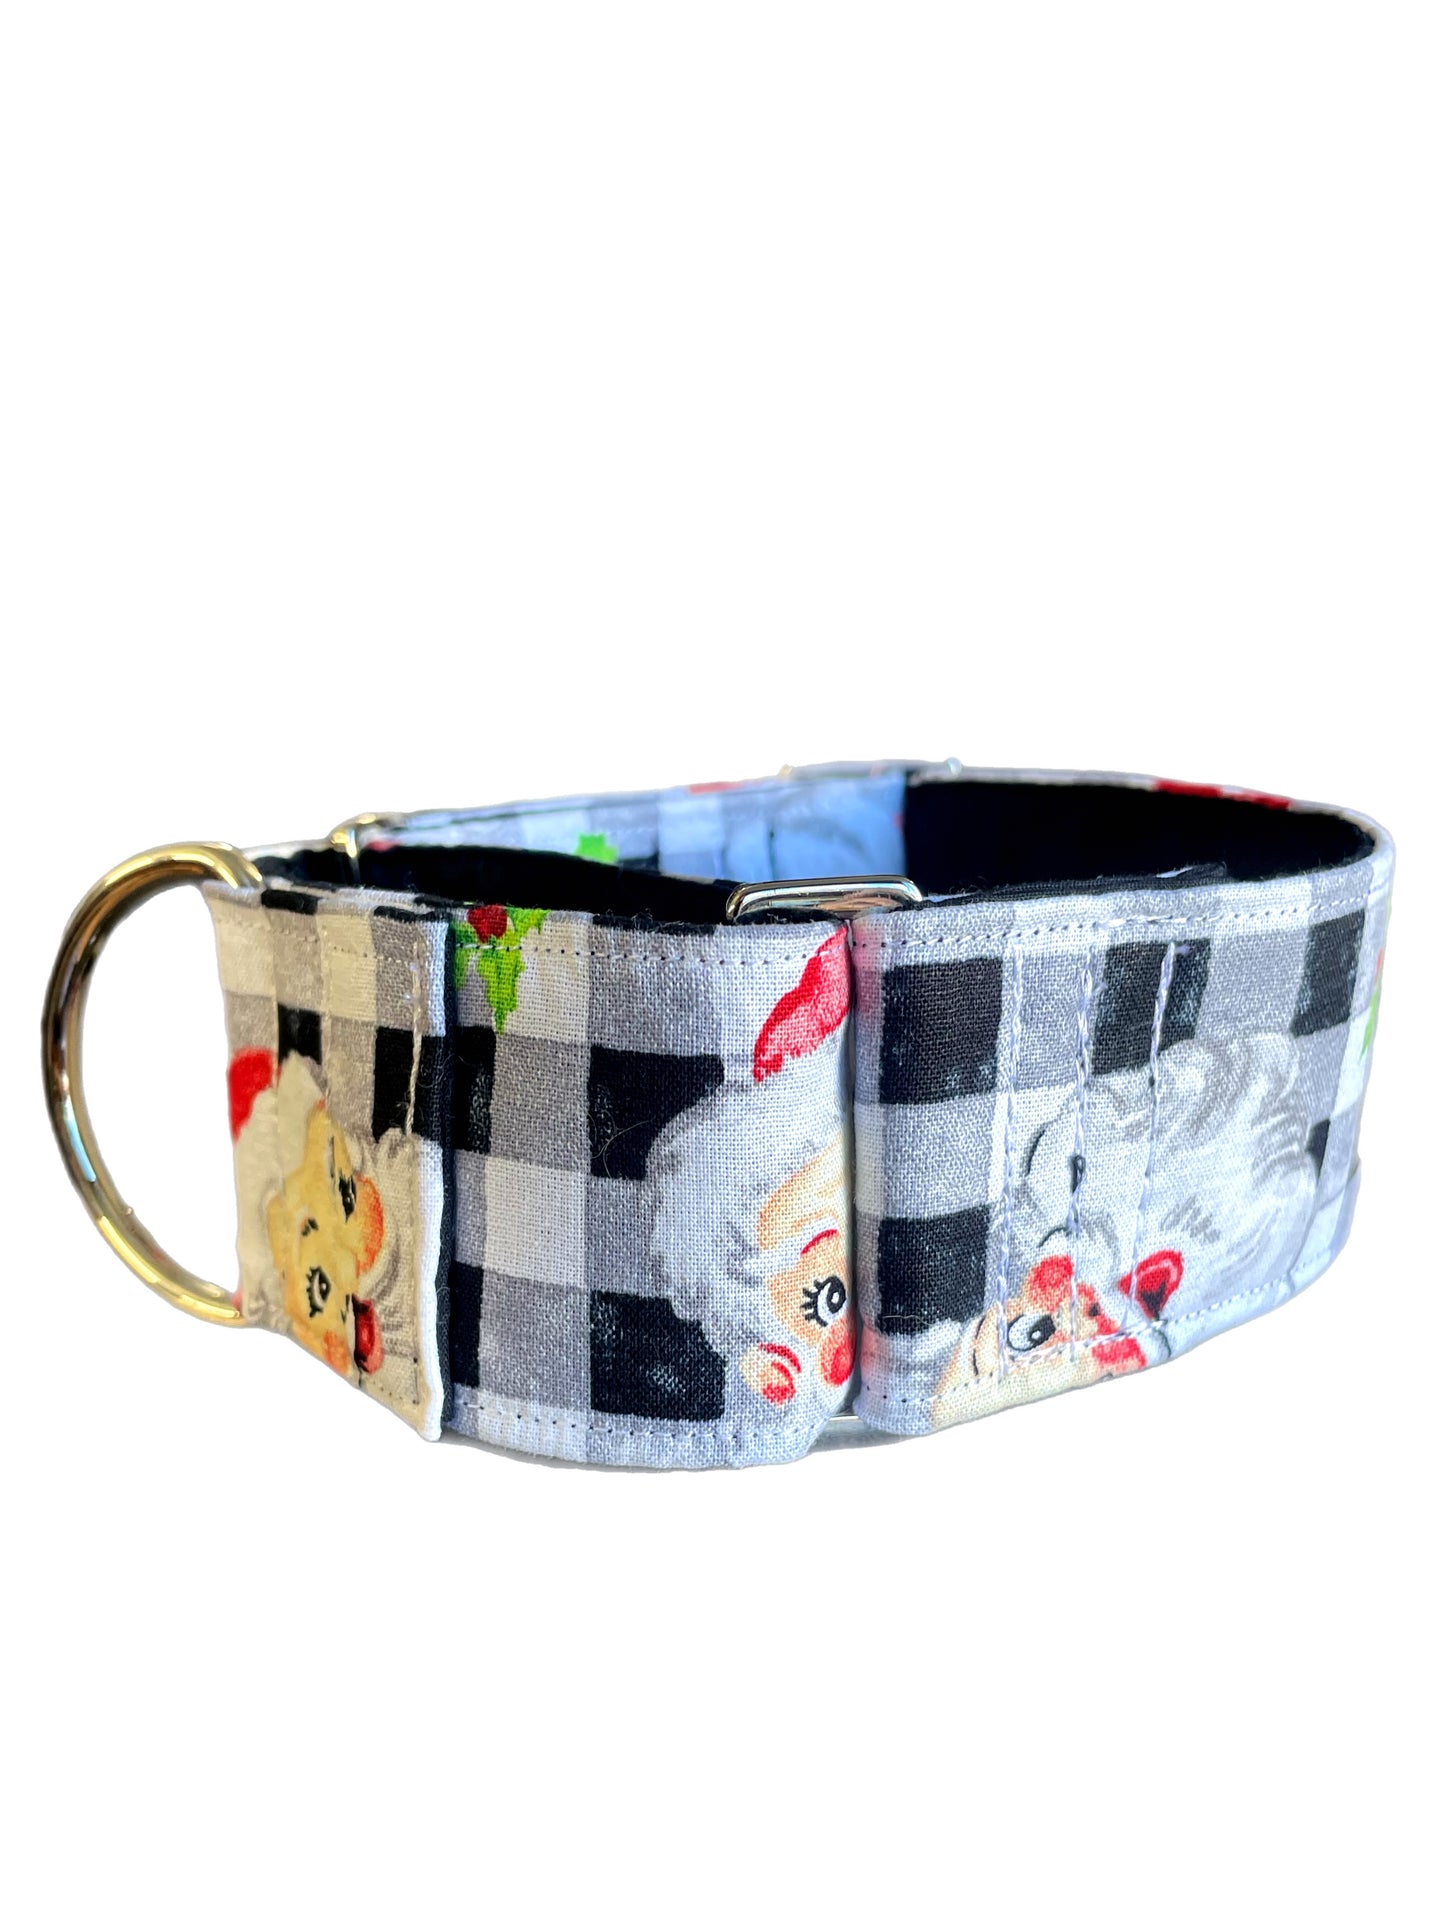 Merry making Christmas Santa Cotton covered greyhound Martingale collar 50mm width super soft